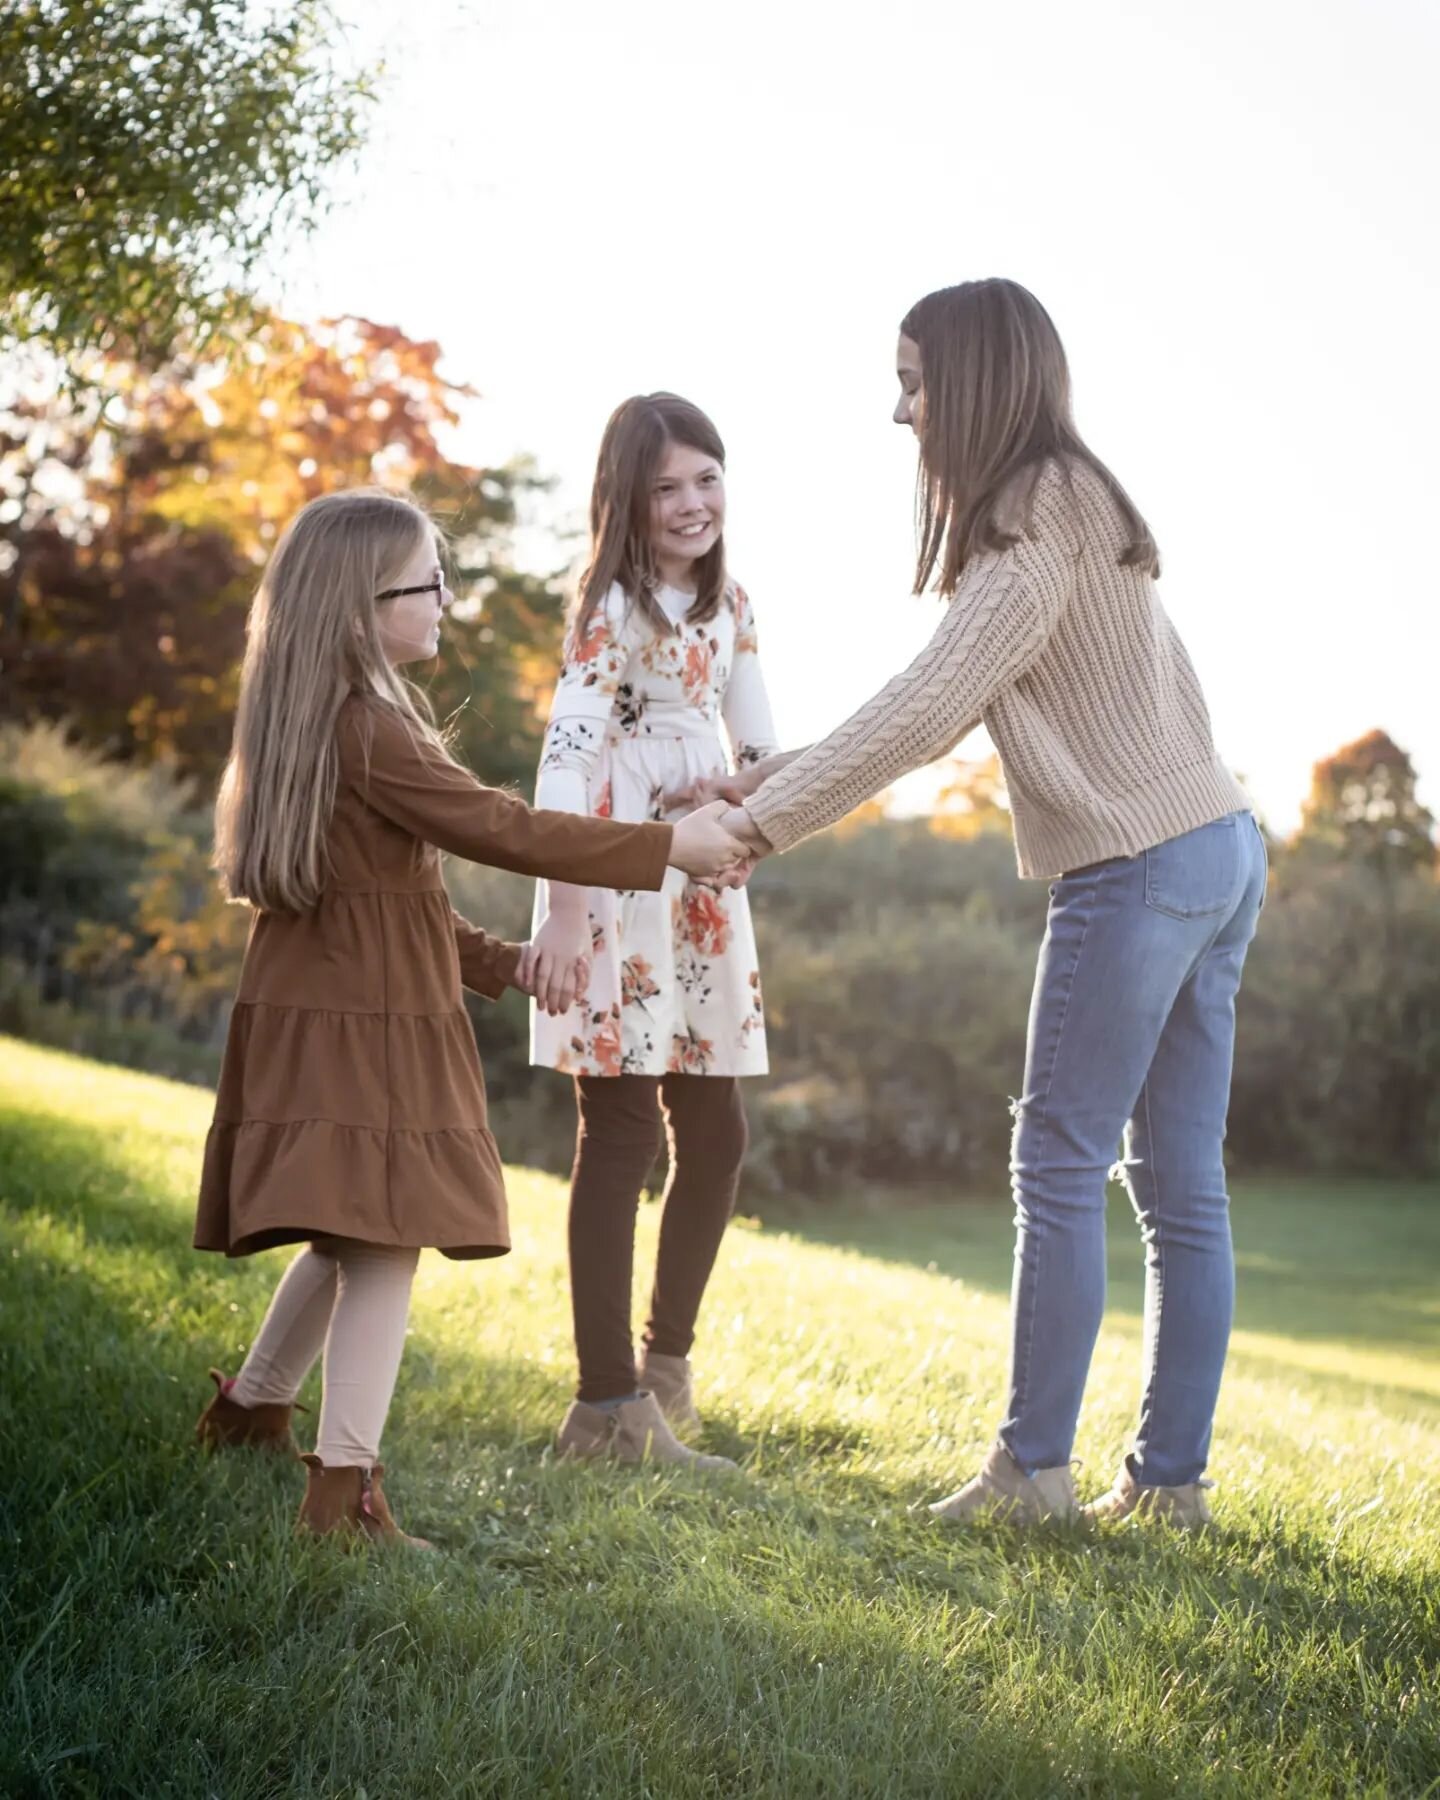 Starting your Monday off with a sneakpeak! I had the best time capturing photos for this wonderful family!

#centralpaphotographer #familyphotos 
#fallphotoshoot 
#statecollegephotographer